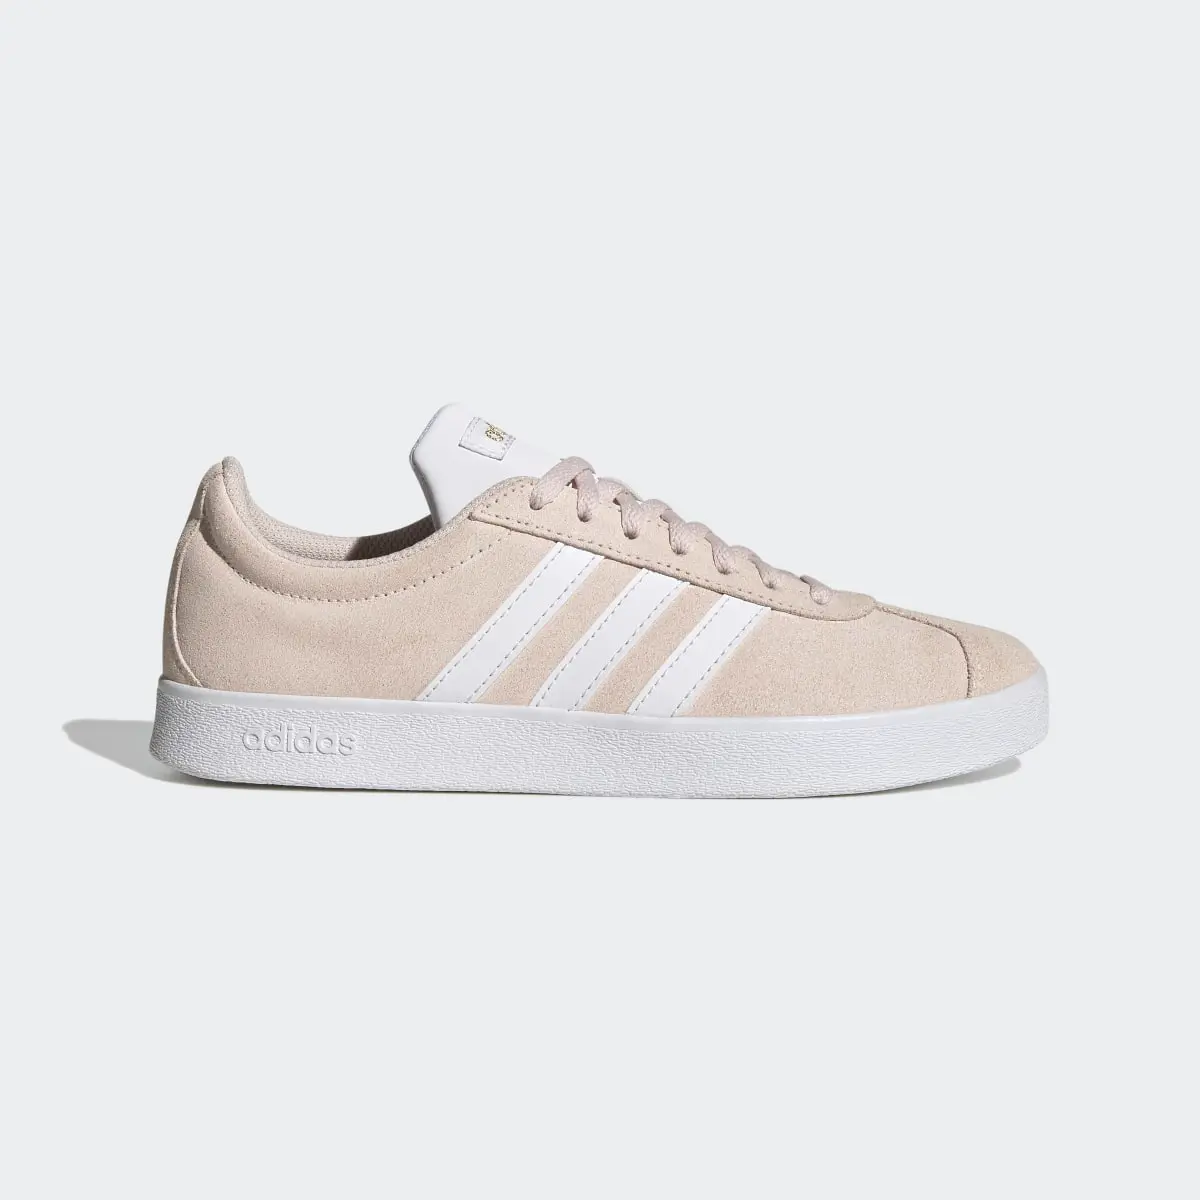 Adidas VL Court 2.0 Suede Shoes. 2